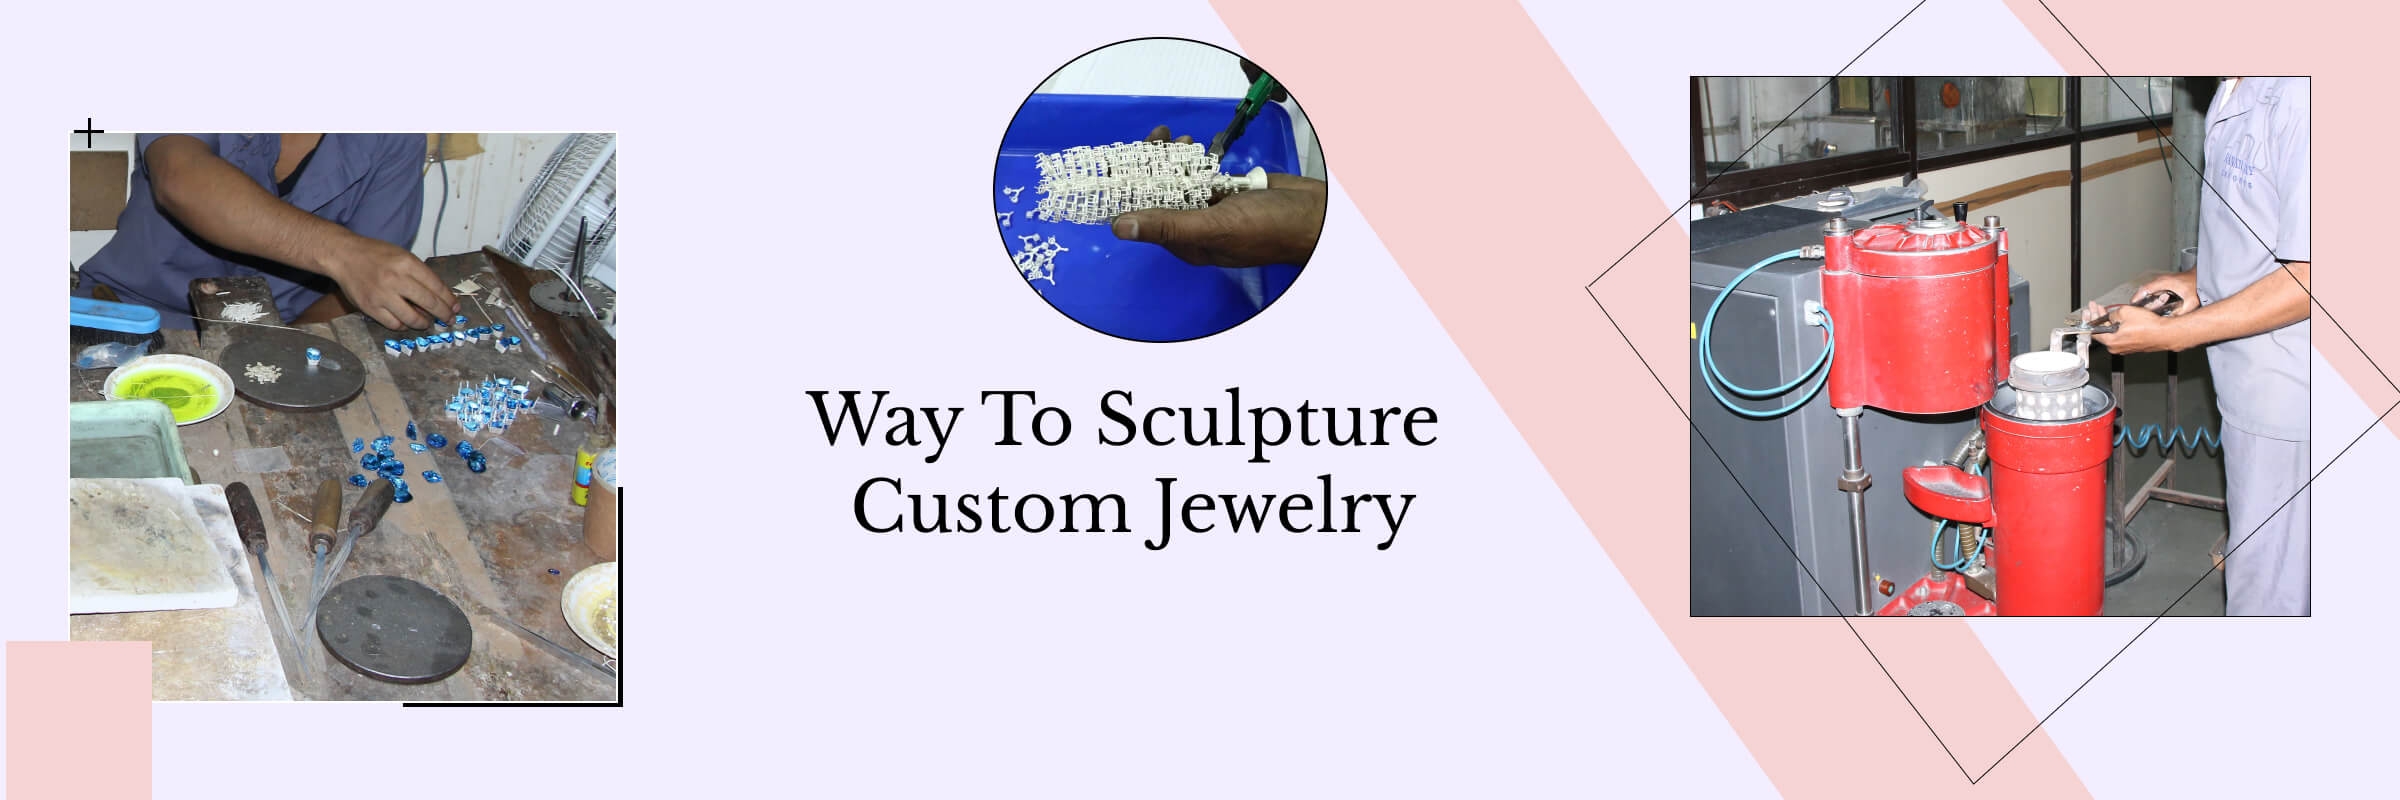 Custom Jewelry Manufacturing: A Step-by-Step Guide